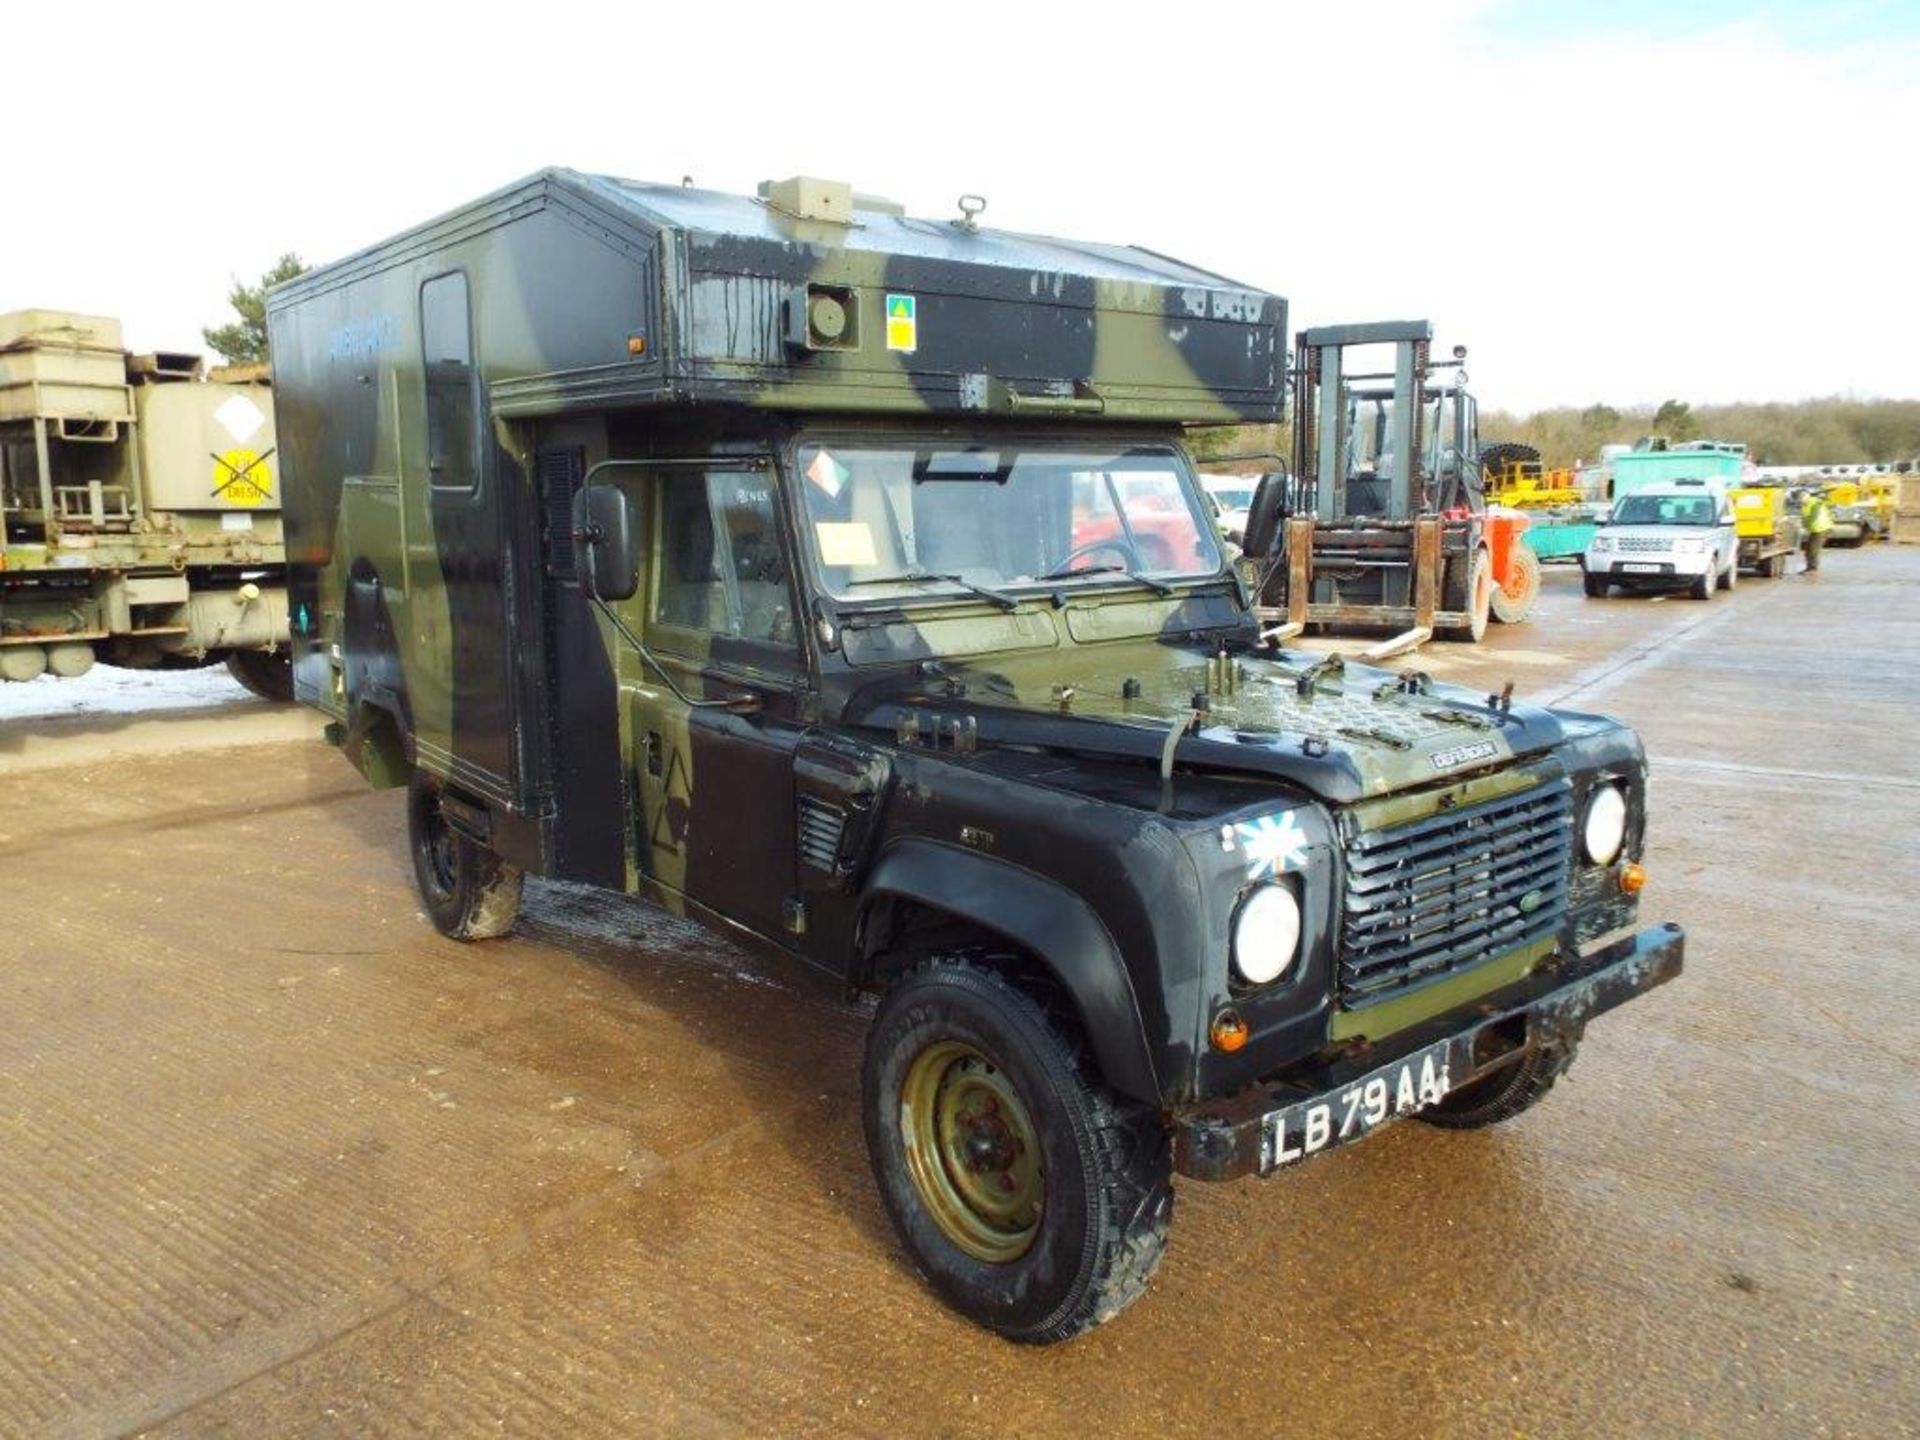 Military Specification LHD Land Rover Wolf 130 ambulance